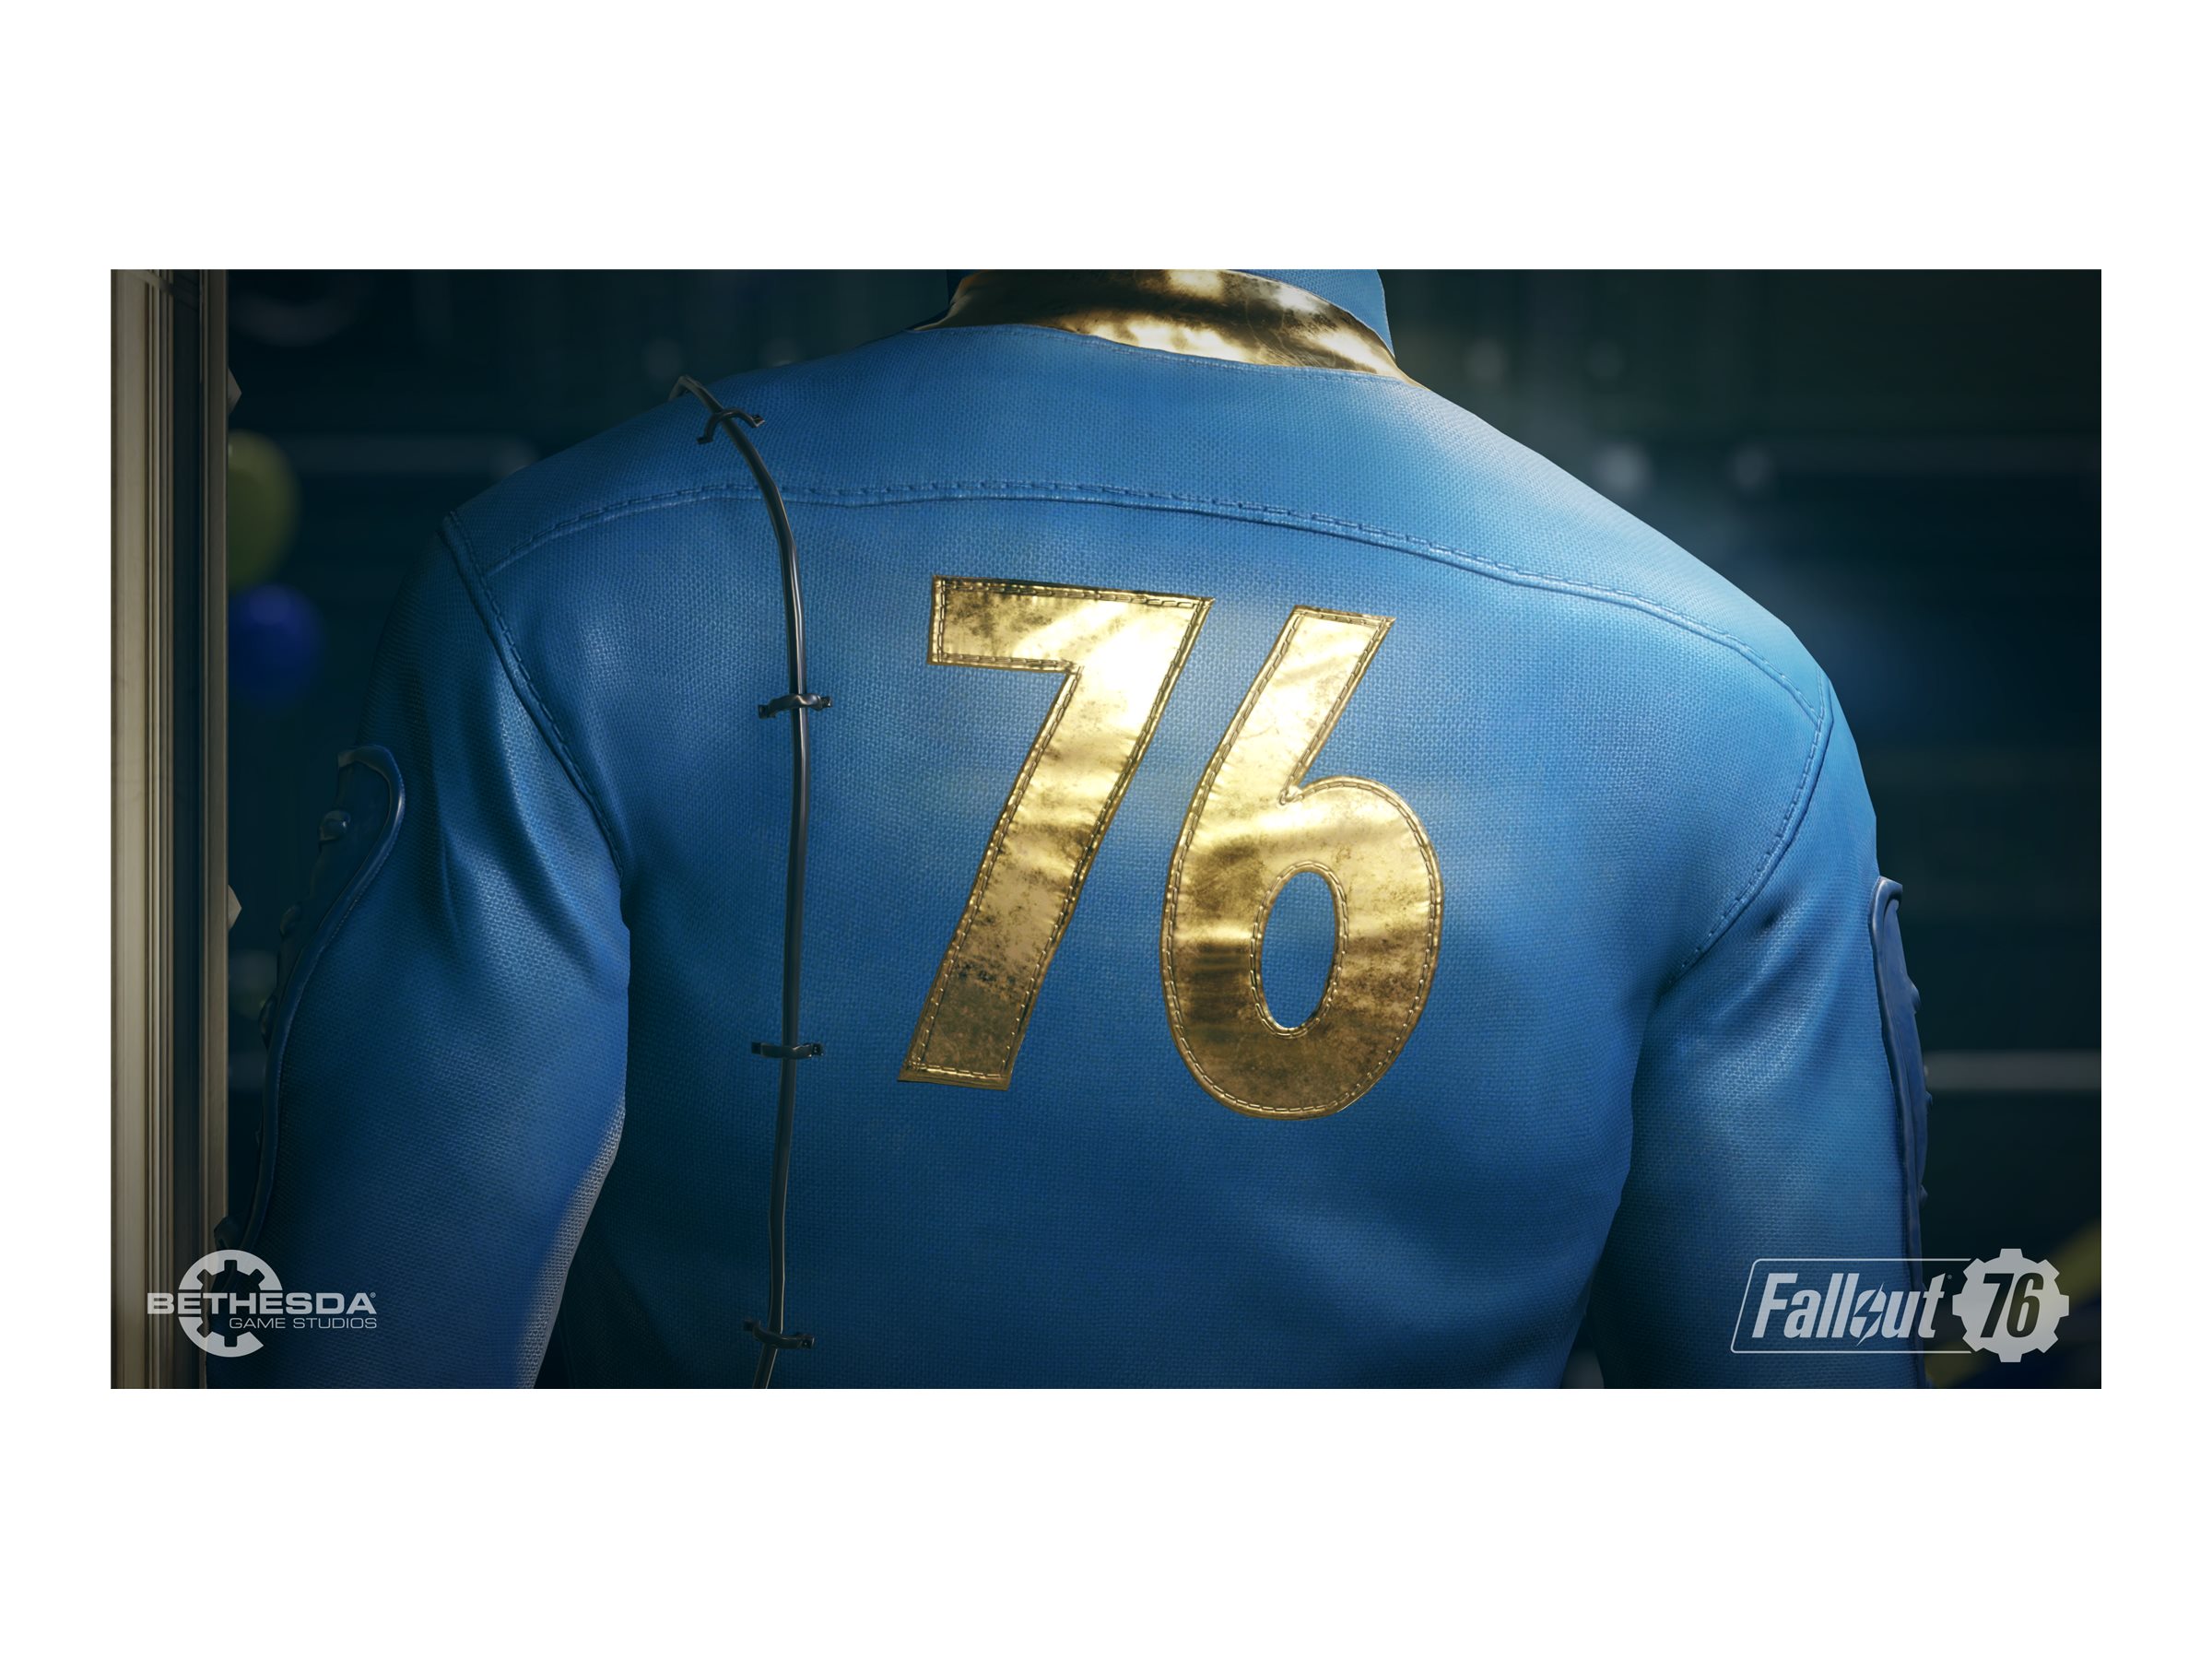 Fallout 76 Tricentennial Edition, Bethesda Softworks, PlayStation 4, 093155173118 - image 5 of 5